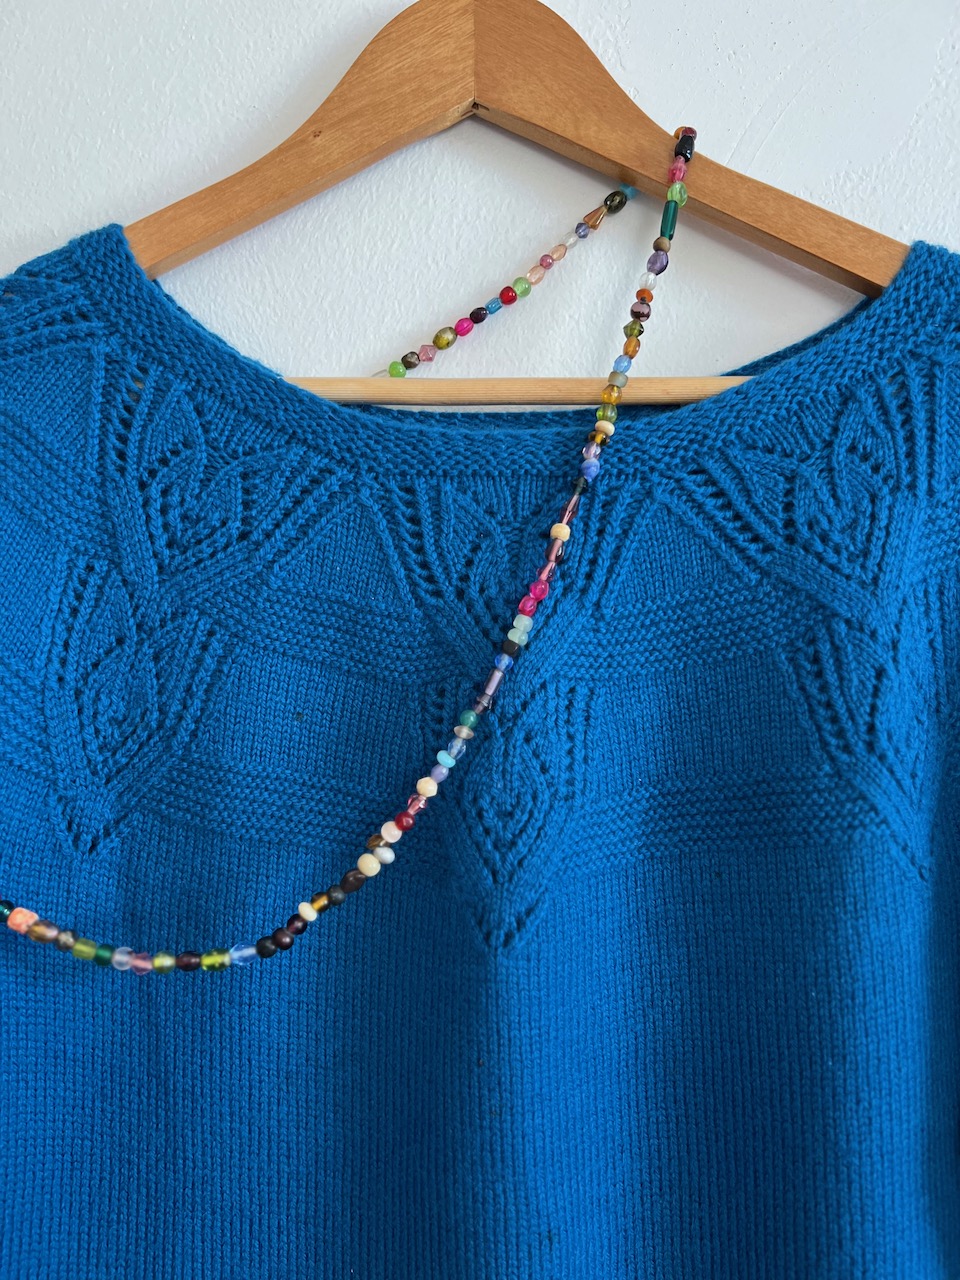 Blue sweater with beads